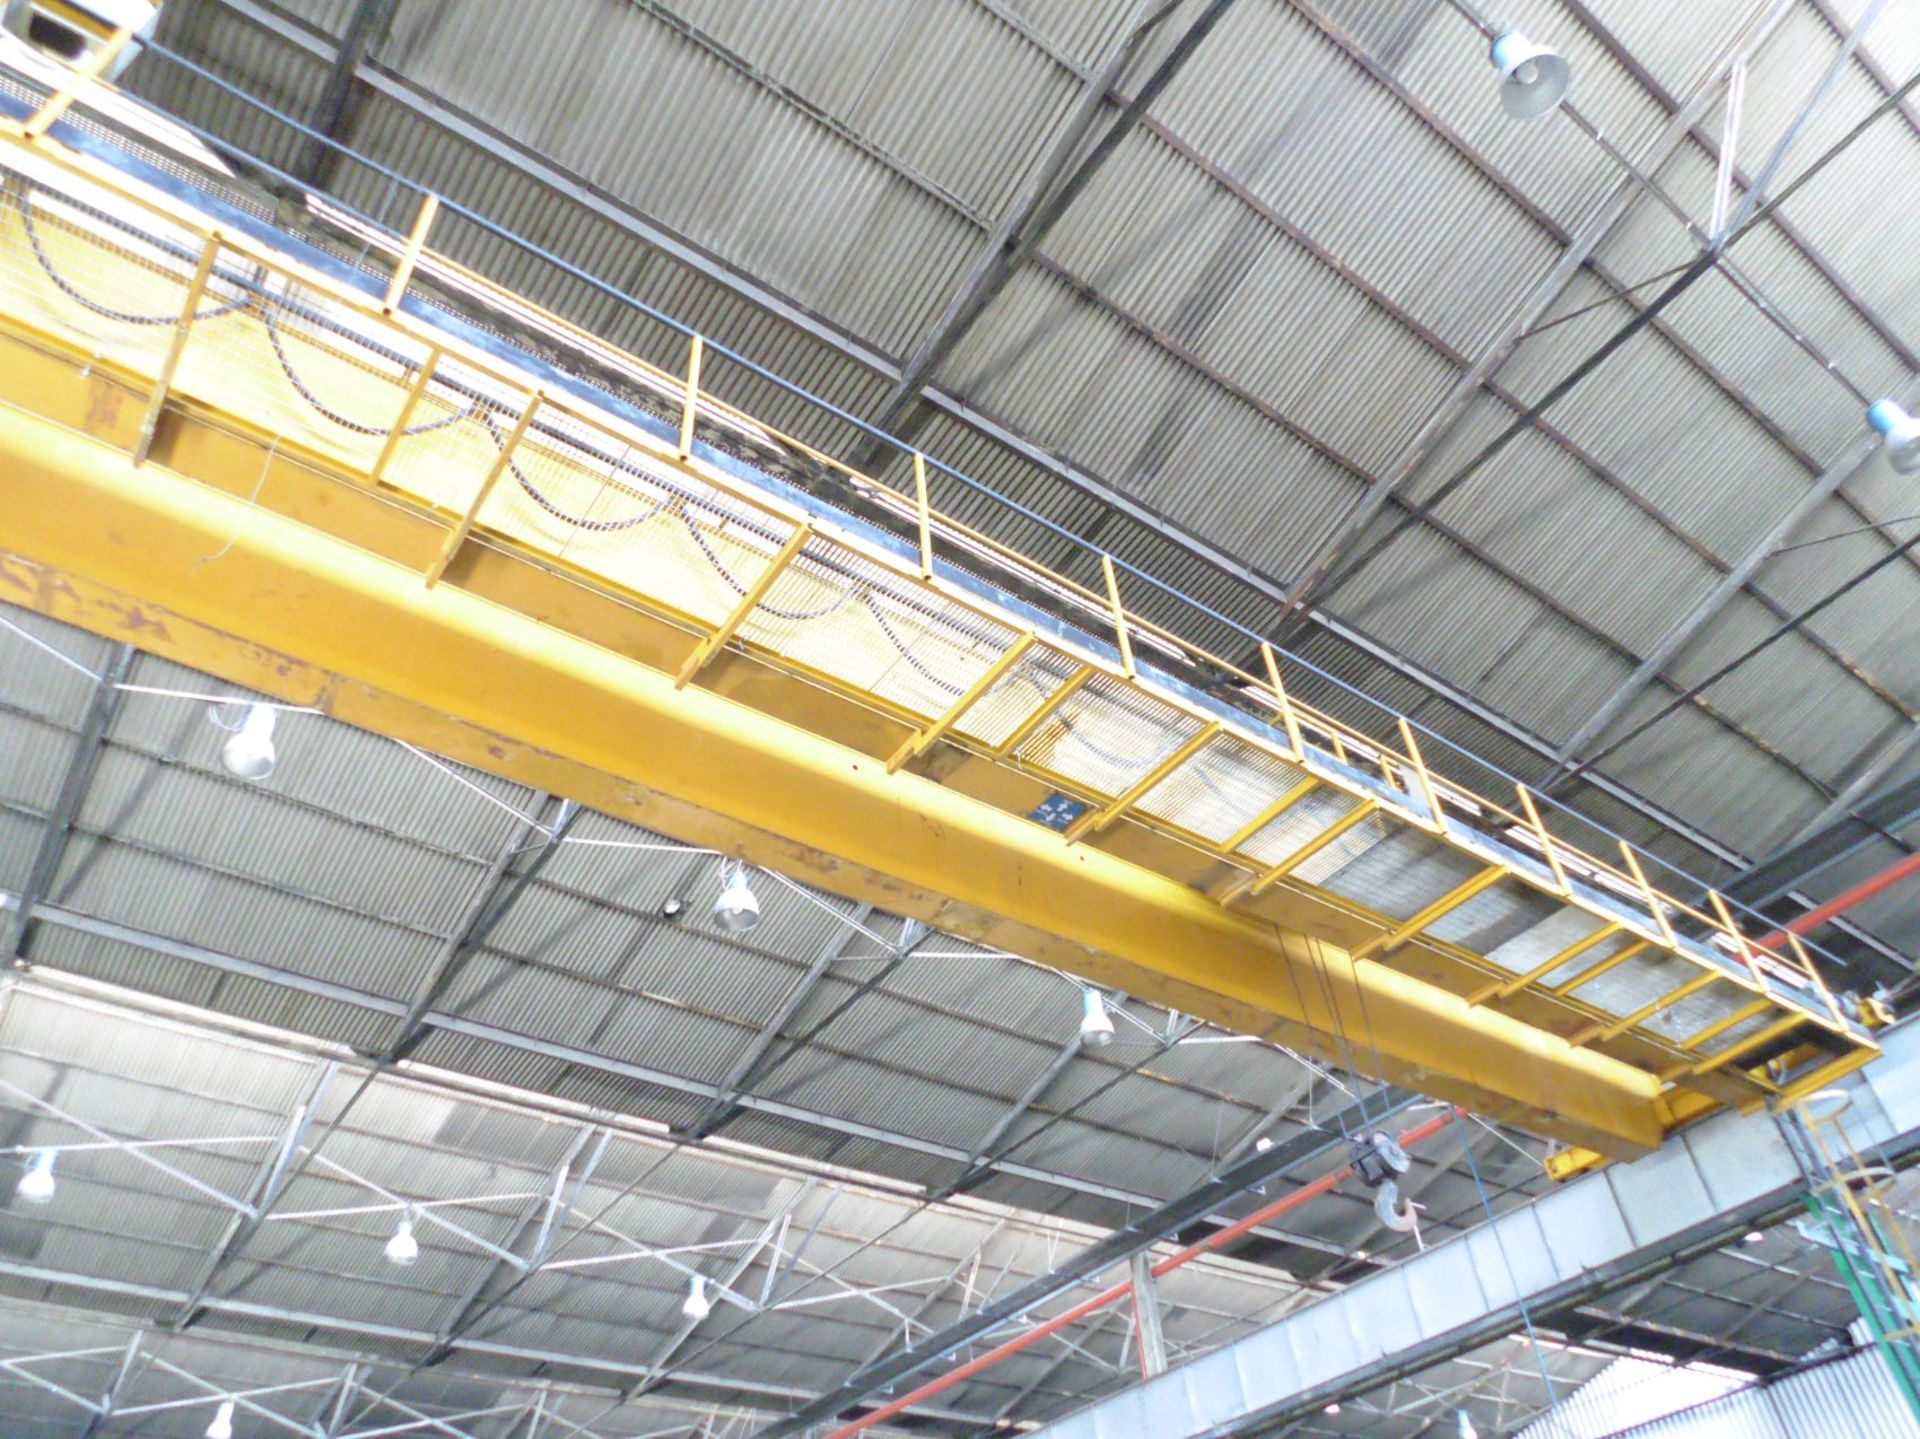 Twin Beam Overhead Travelling Gantry Crane; make and capacity unknown; span 19m, believed to be 20 - Image 2 of 5